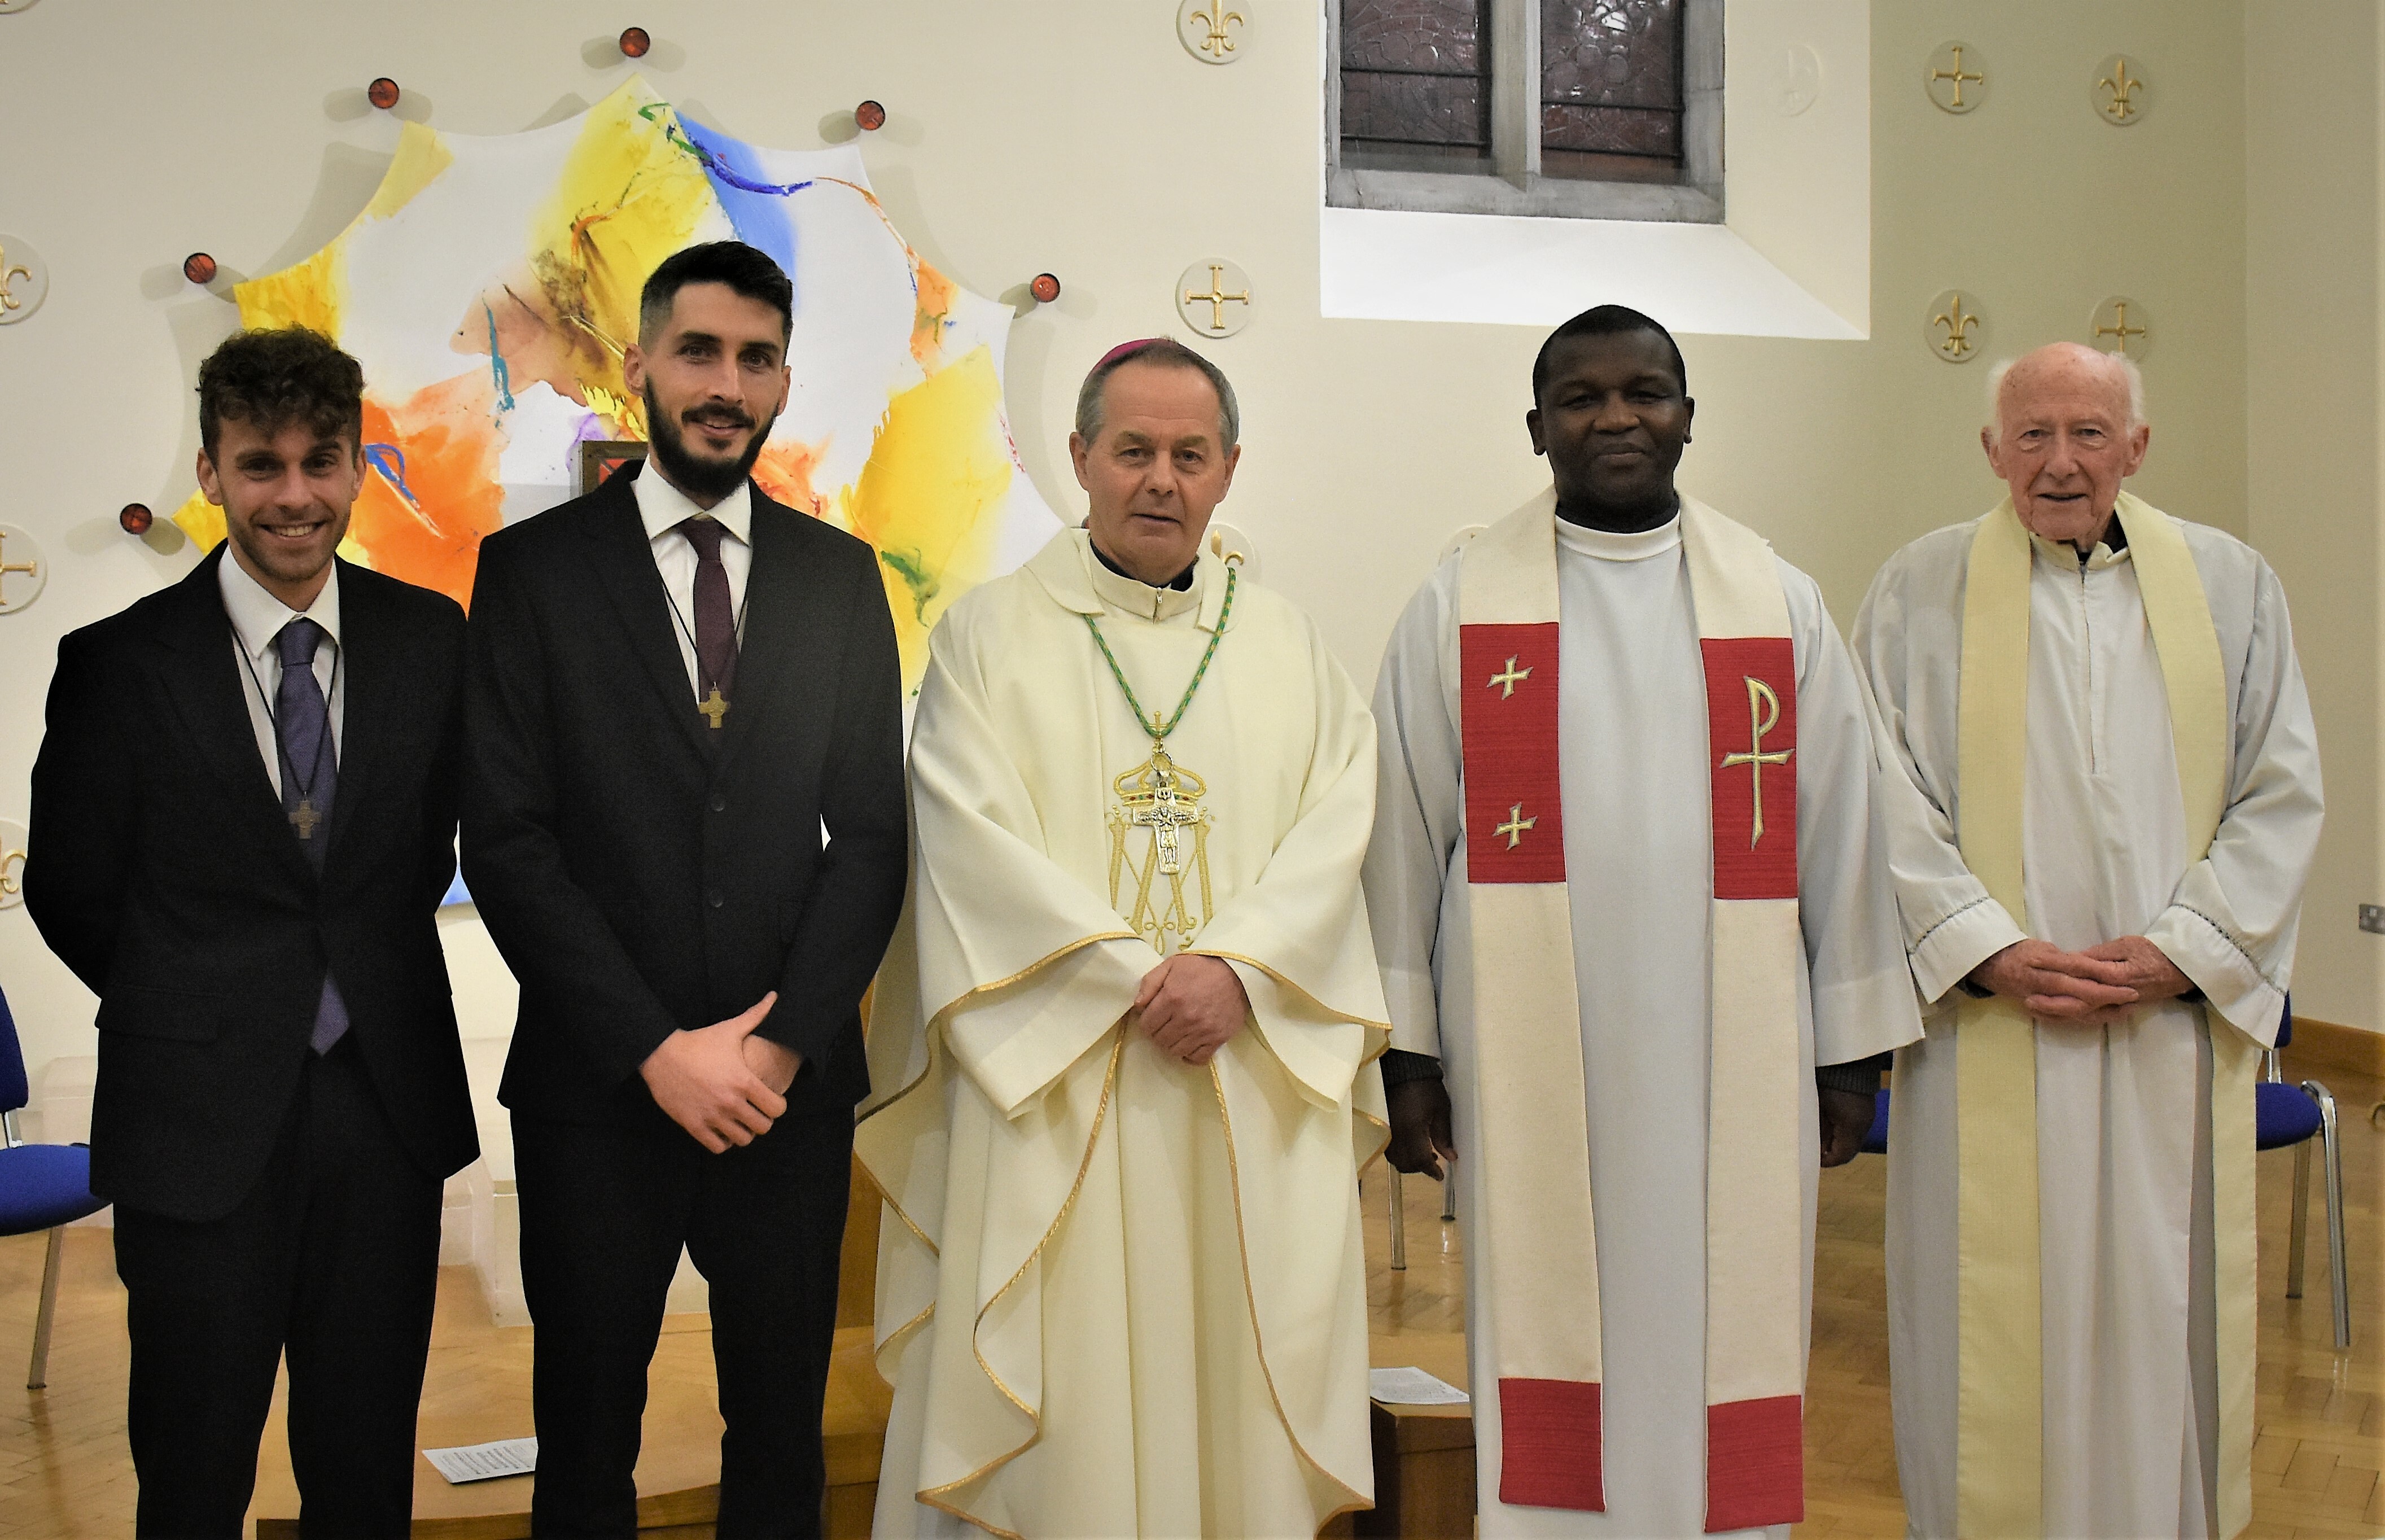 221208-Admission-to-Candidacy-Salesians-LtoR-Clint-Rizzo-Johan-Bugeja-Fr-Cyril-Odia-Fr-Michael.jpg#asset:11419